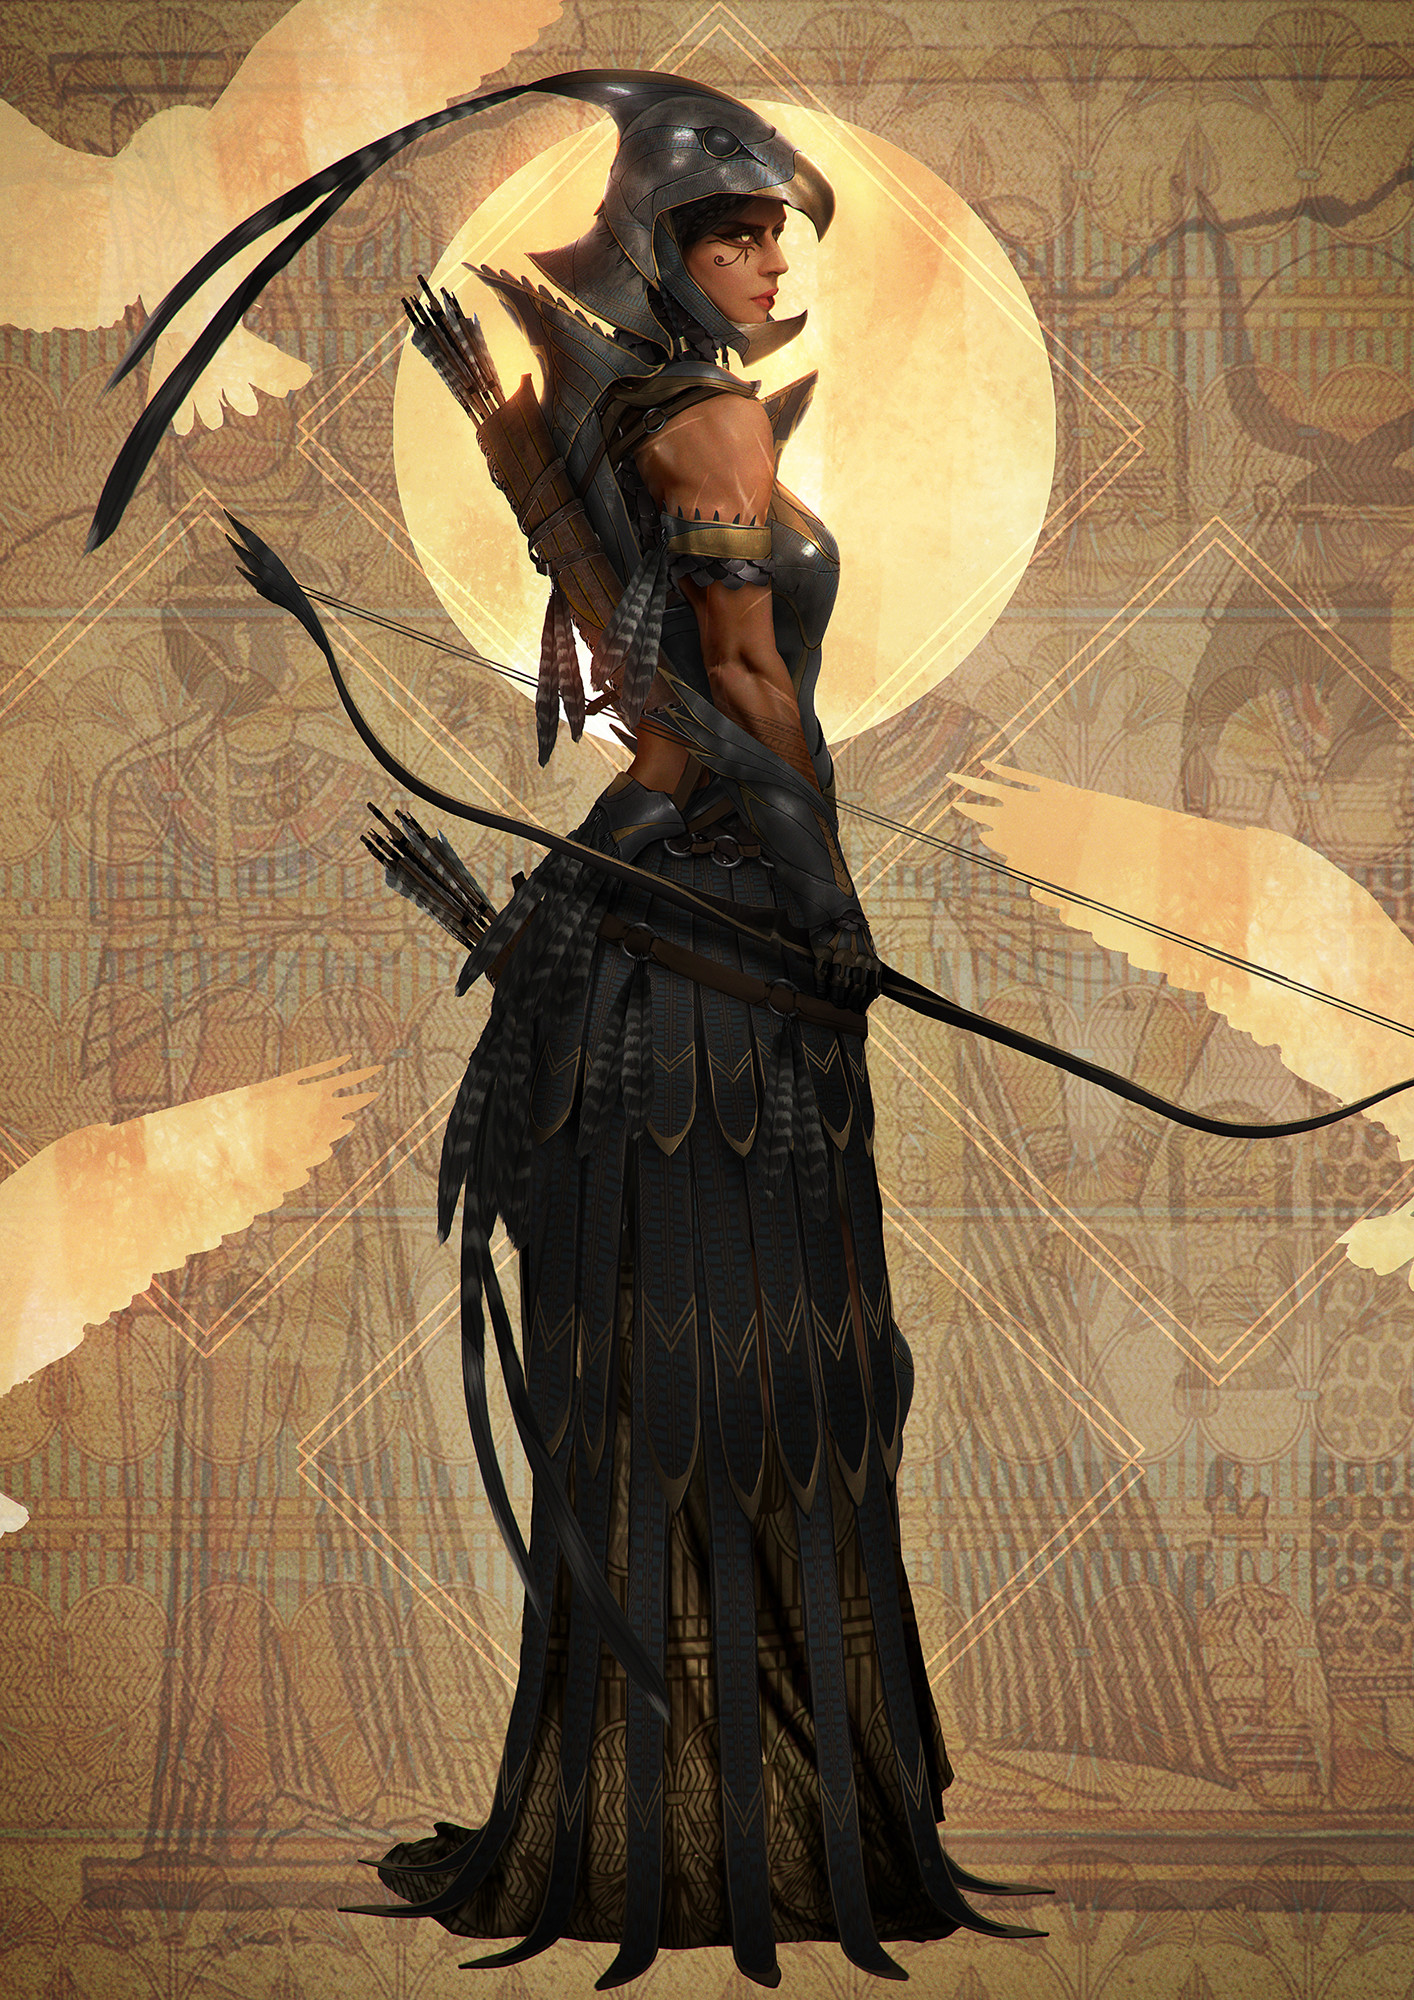 General 1414x2000 Johnson Ting drawing women Egyptian helmet weapon arrows bow quiver pattern feathers fantasy art fantasy girl bow and arrow standing girls with guns artwork oriental